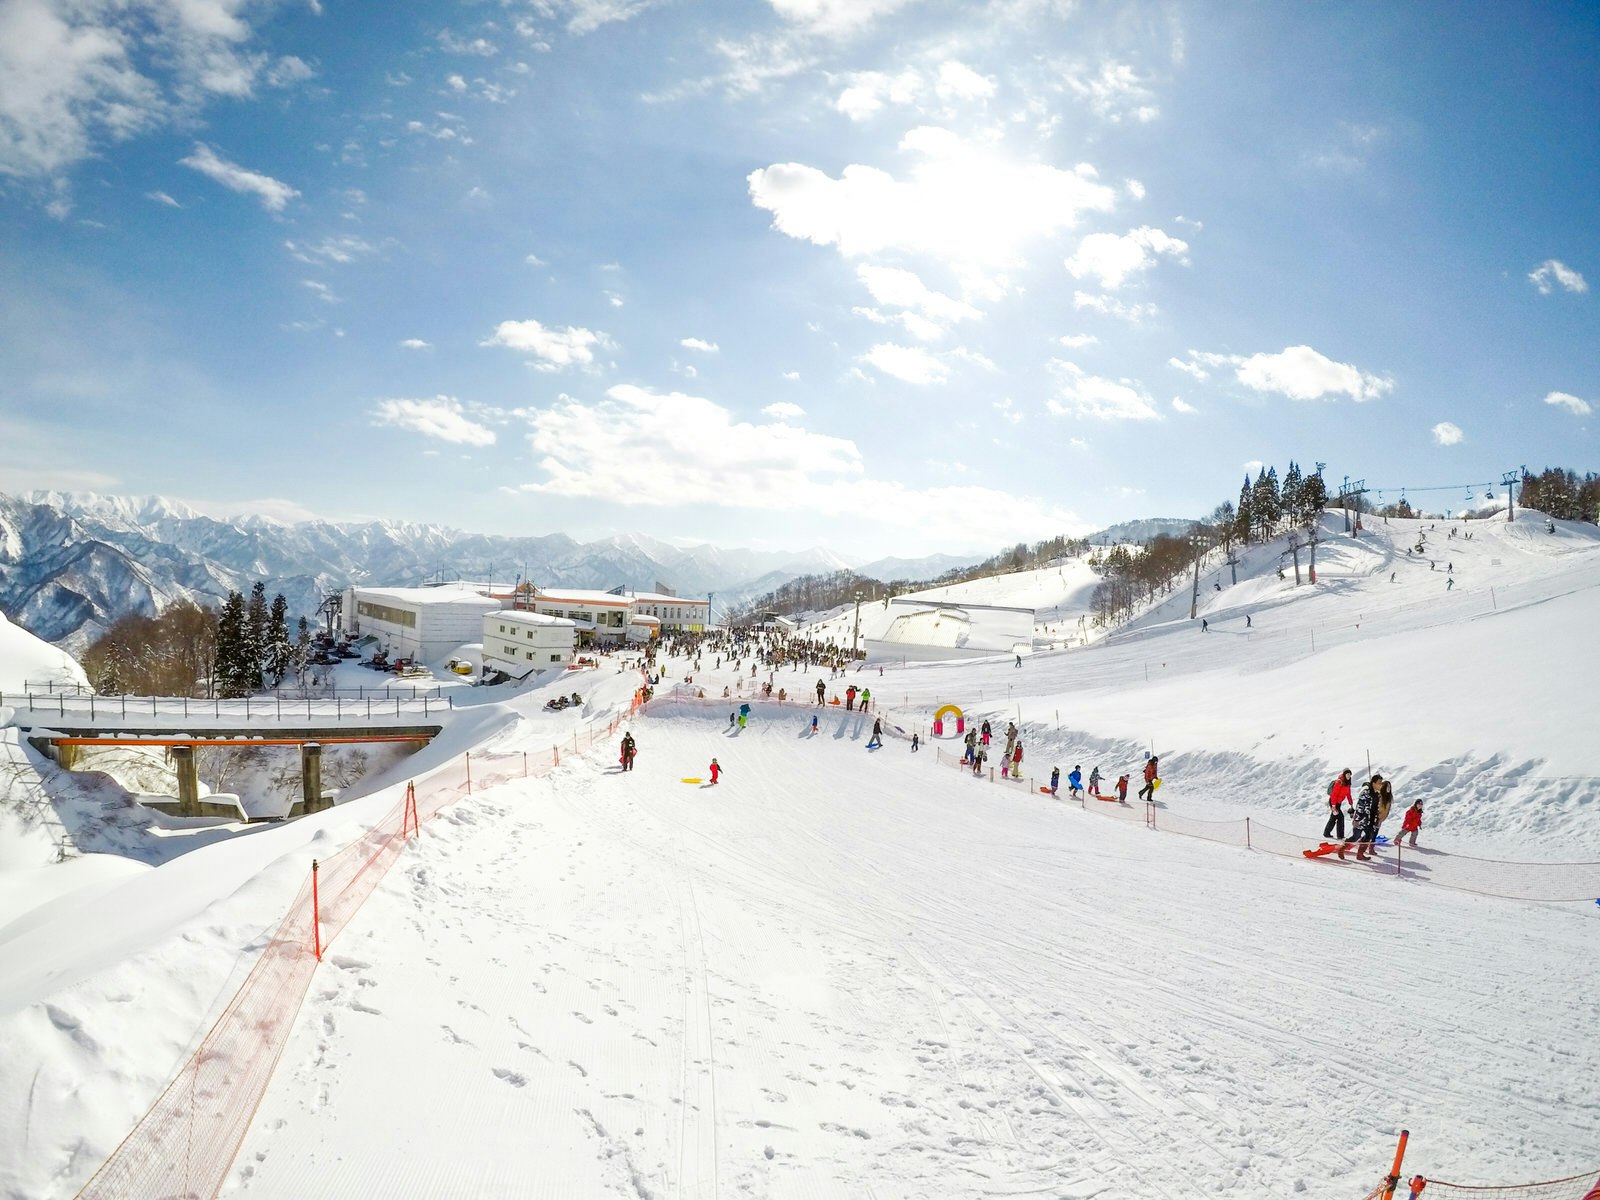 View of skiing on a wide snow-covered ski run on a clear day at Gala Yuzawa ski resort